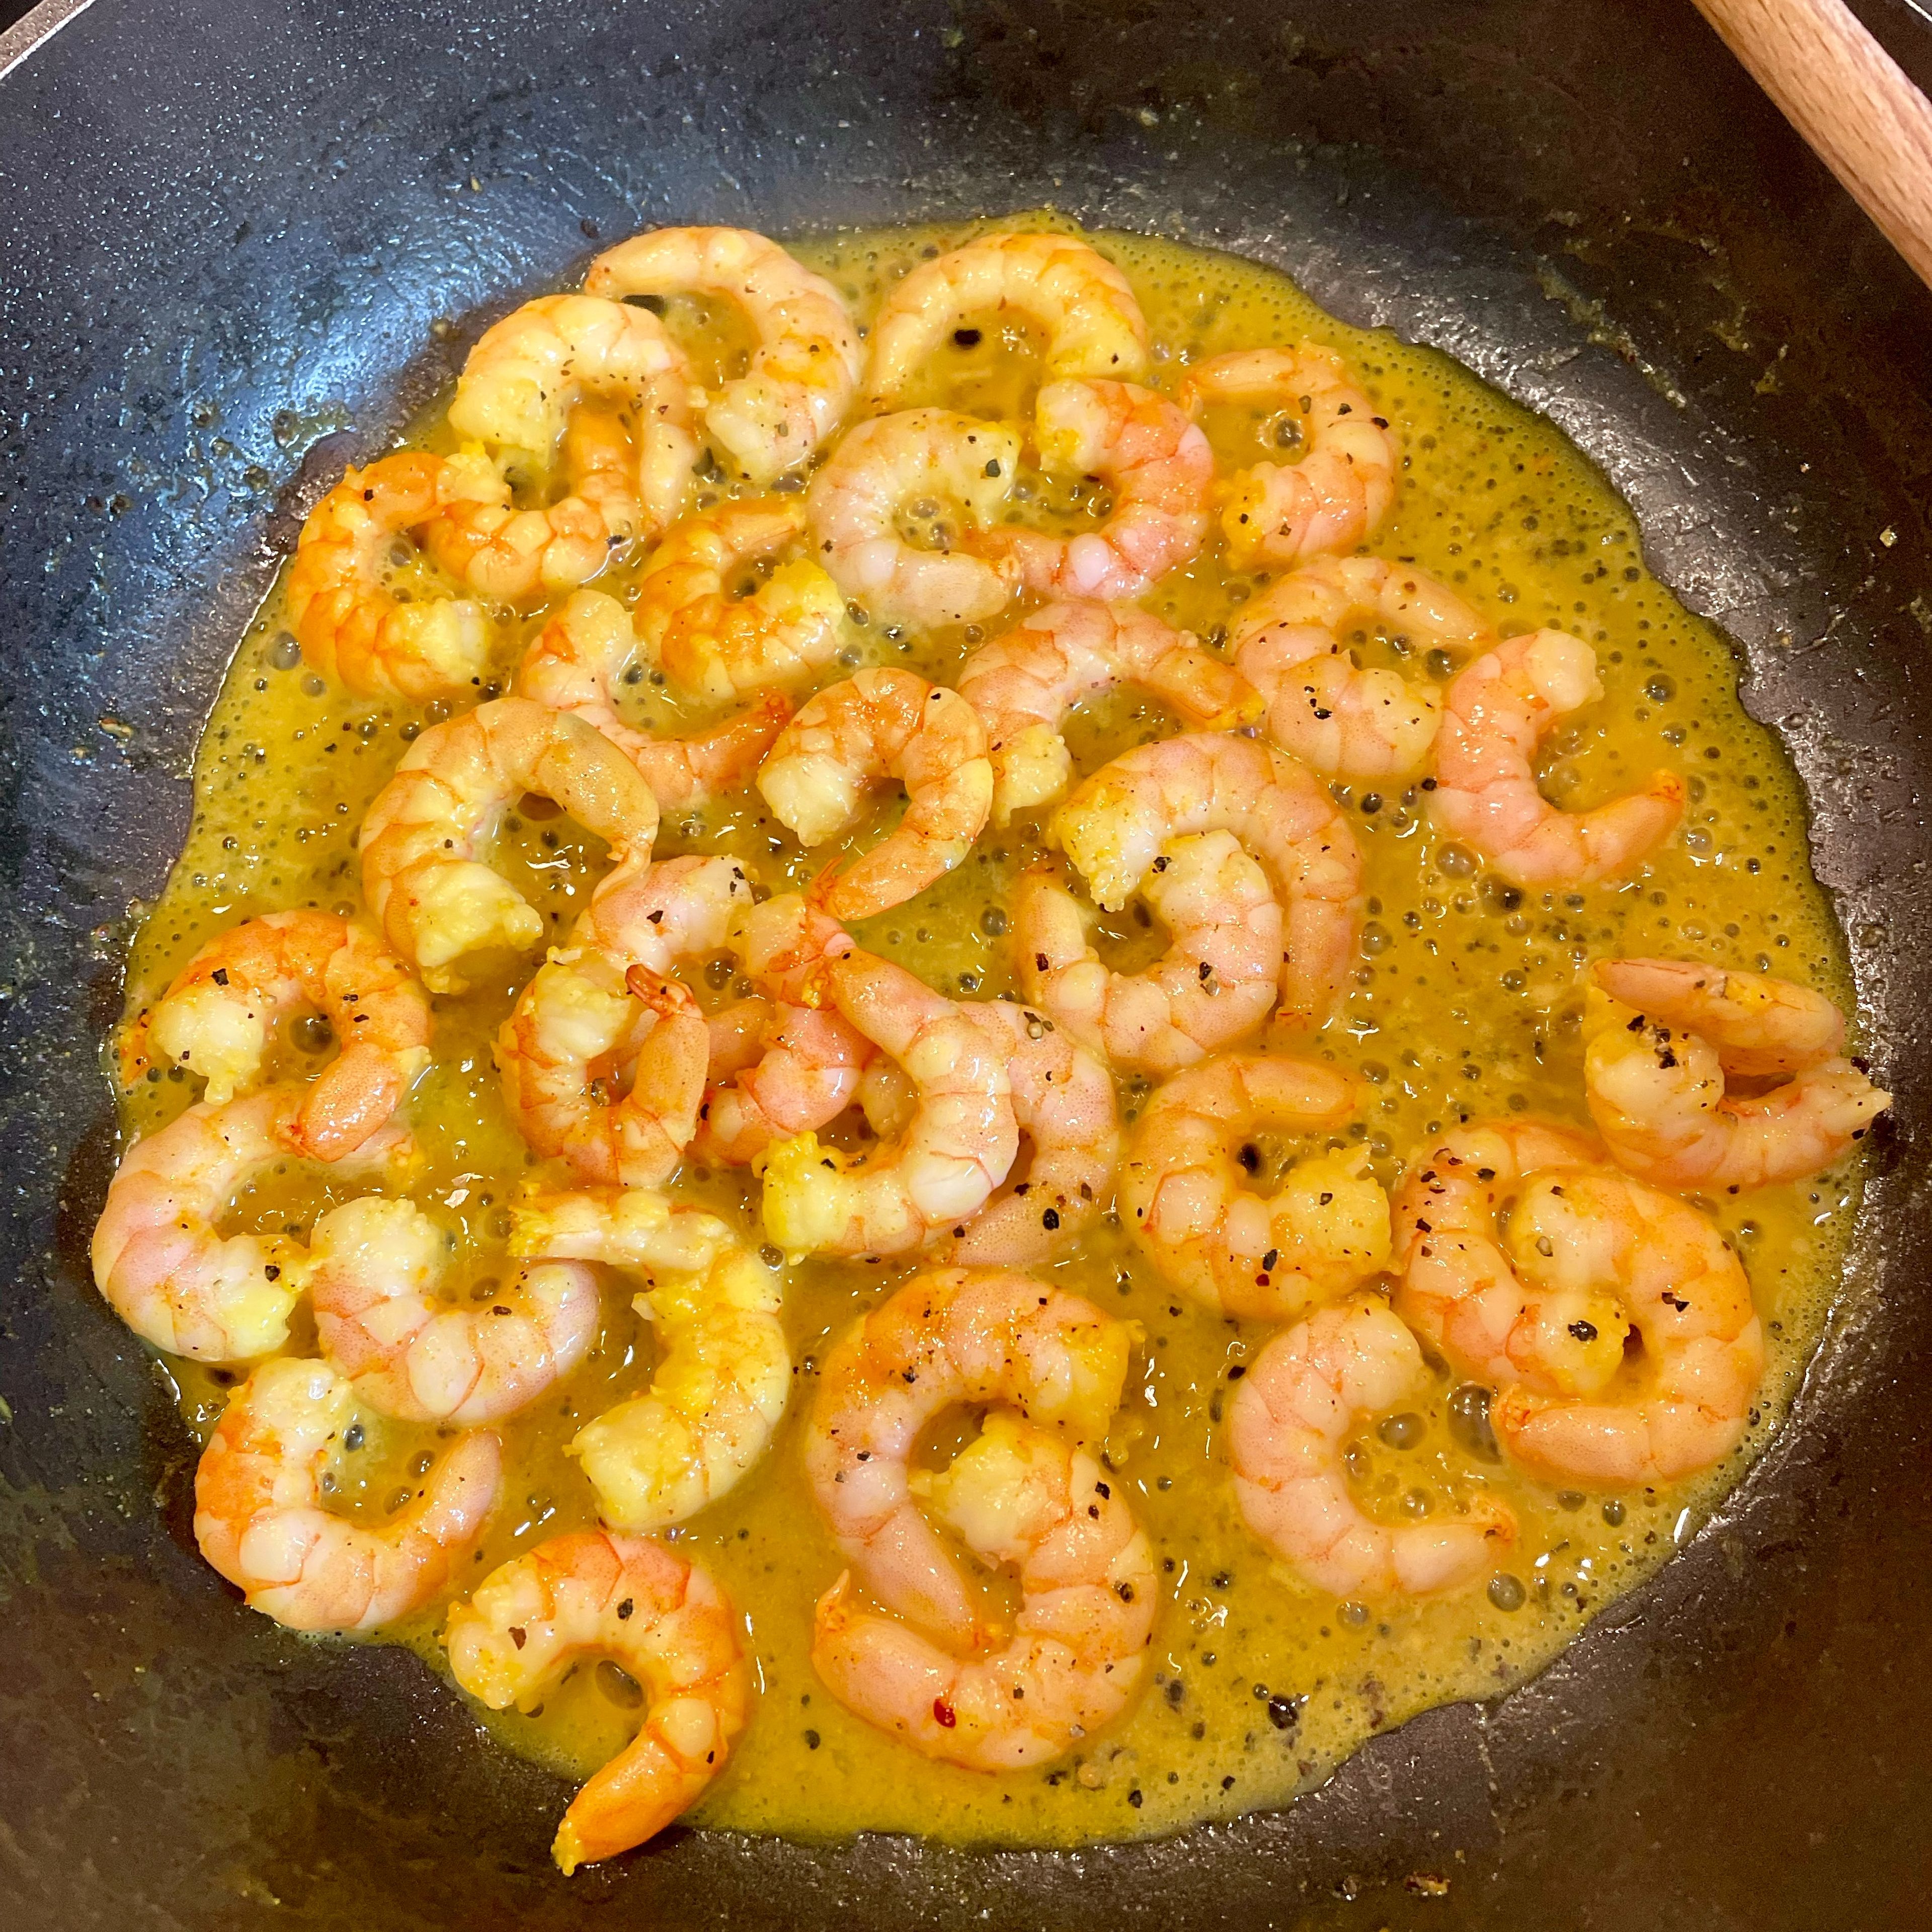 Heat oil in the pan and fry prawns till changing color. Remove prawns from pan and set aside.